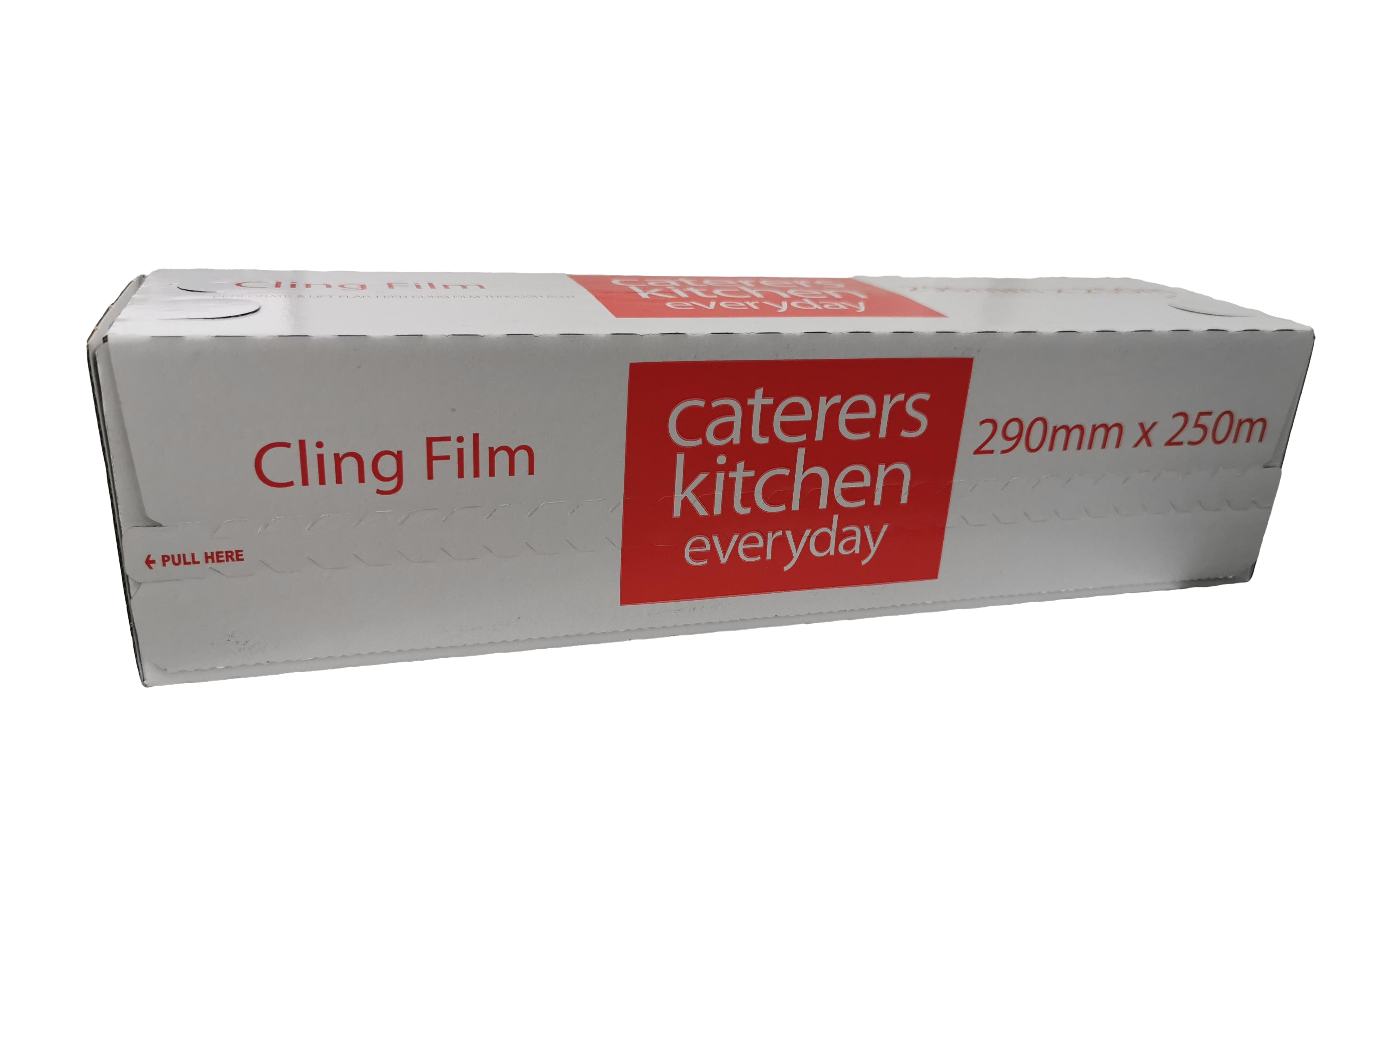 Caterers Kitchen Everyday Cling Film